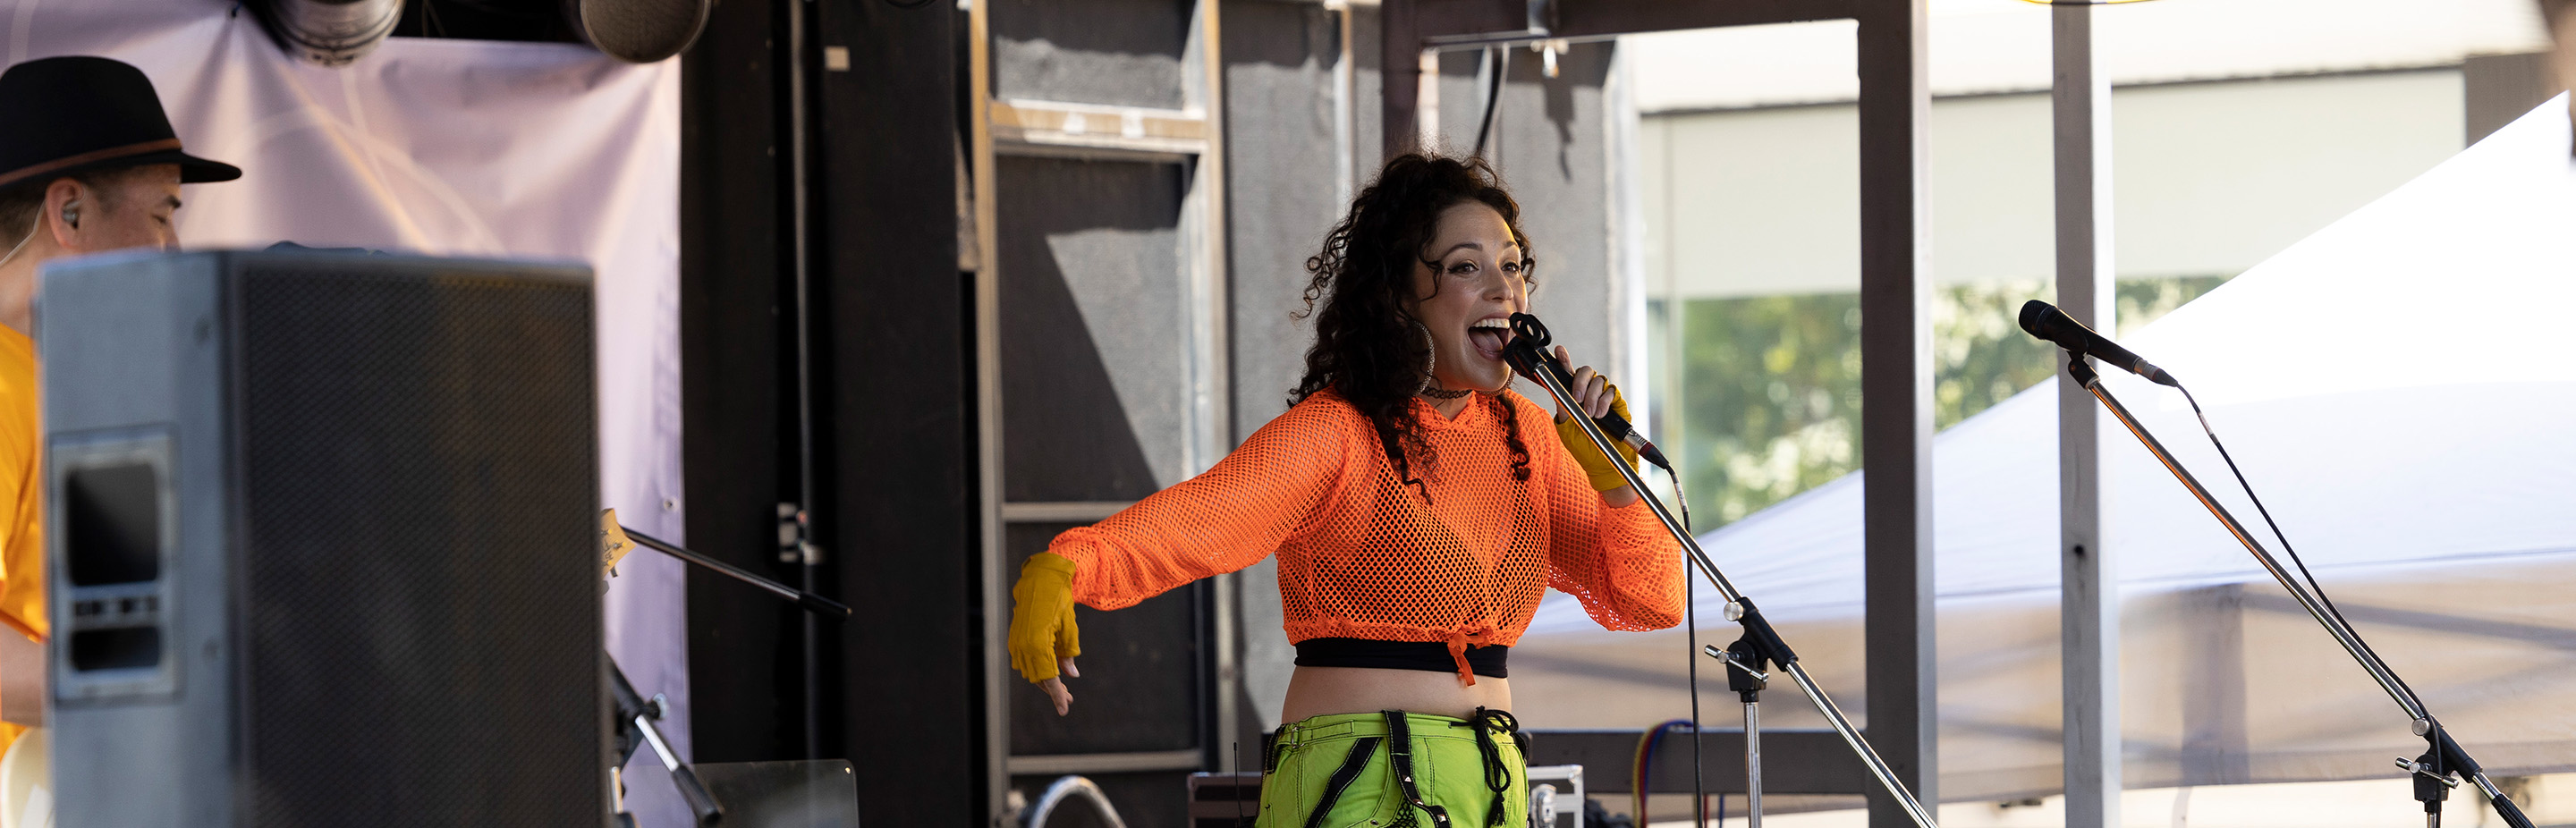 a lady in yellow sings into a microphone